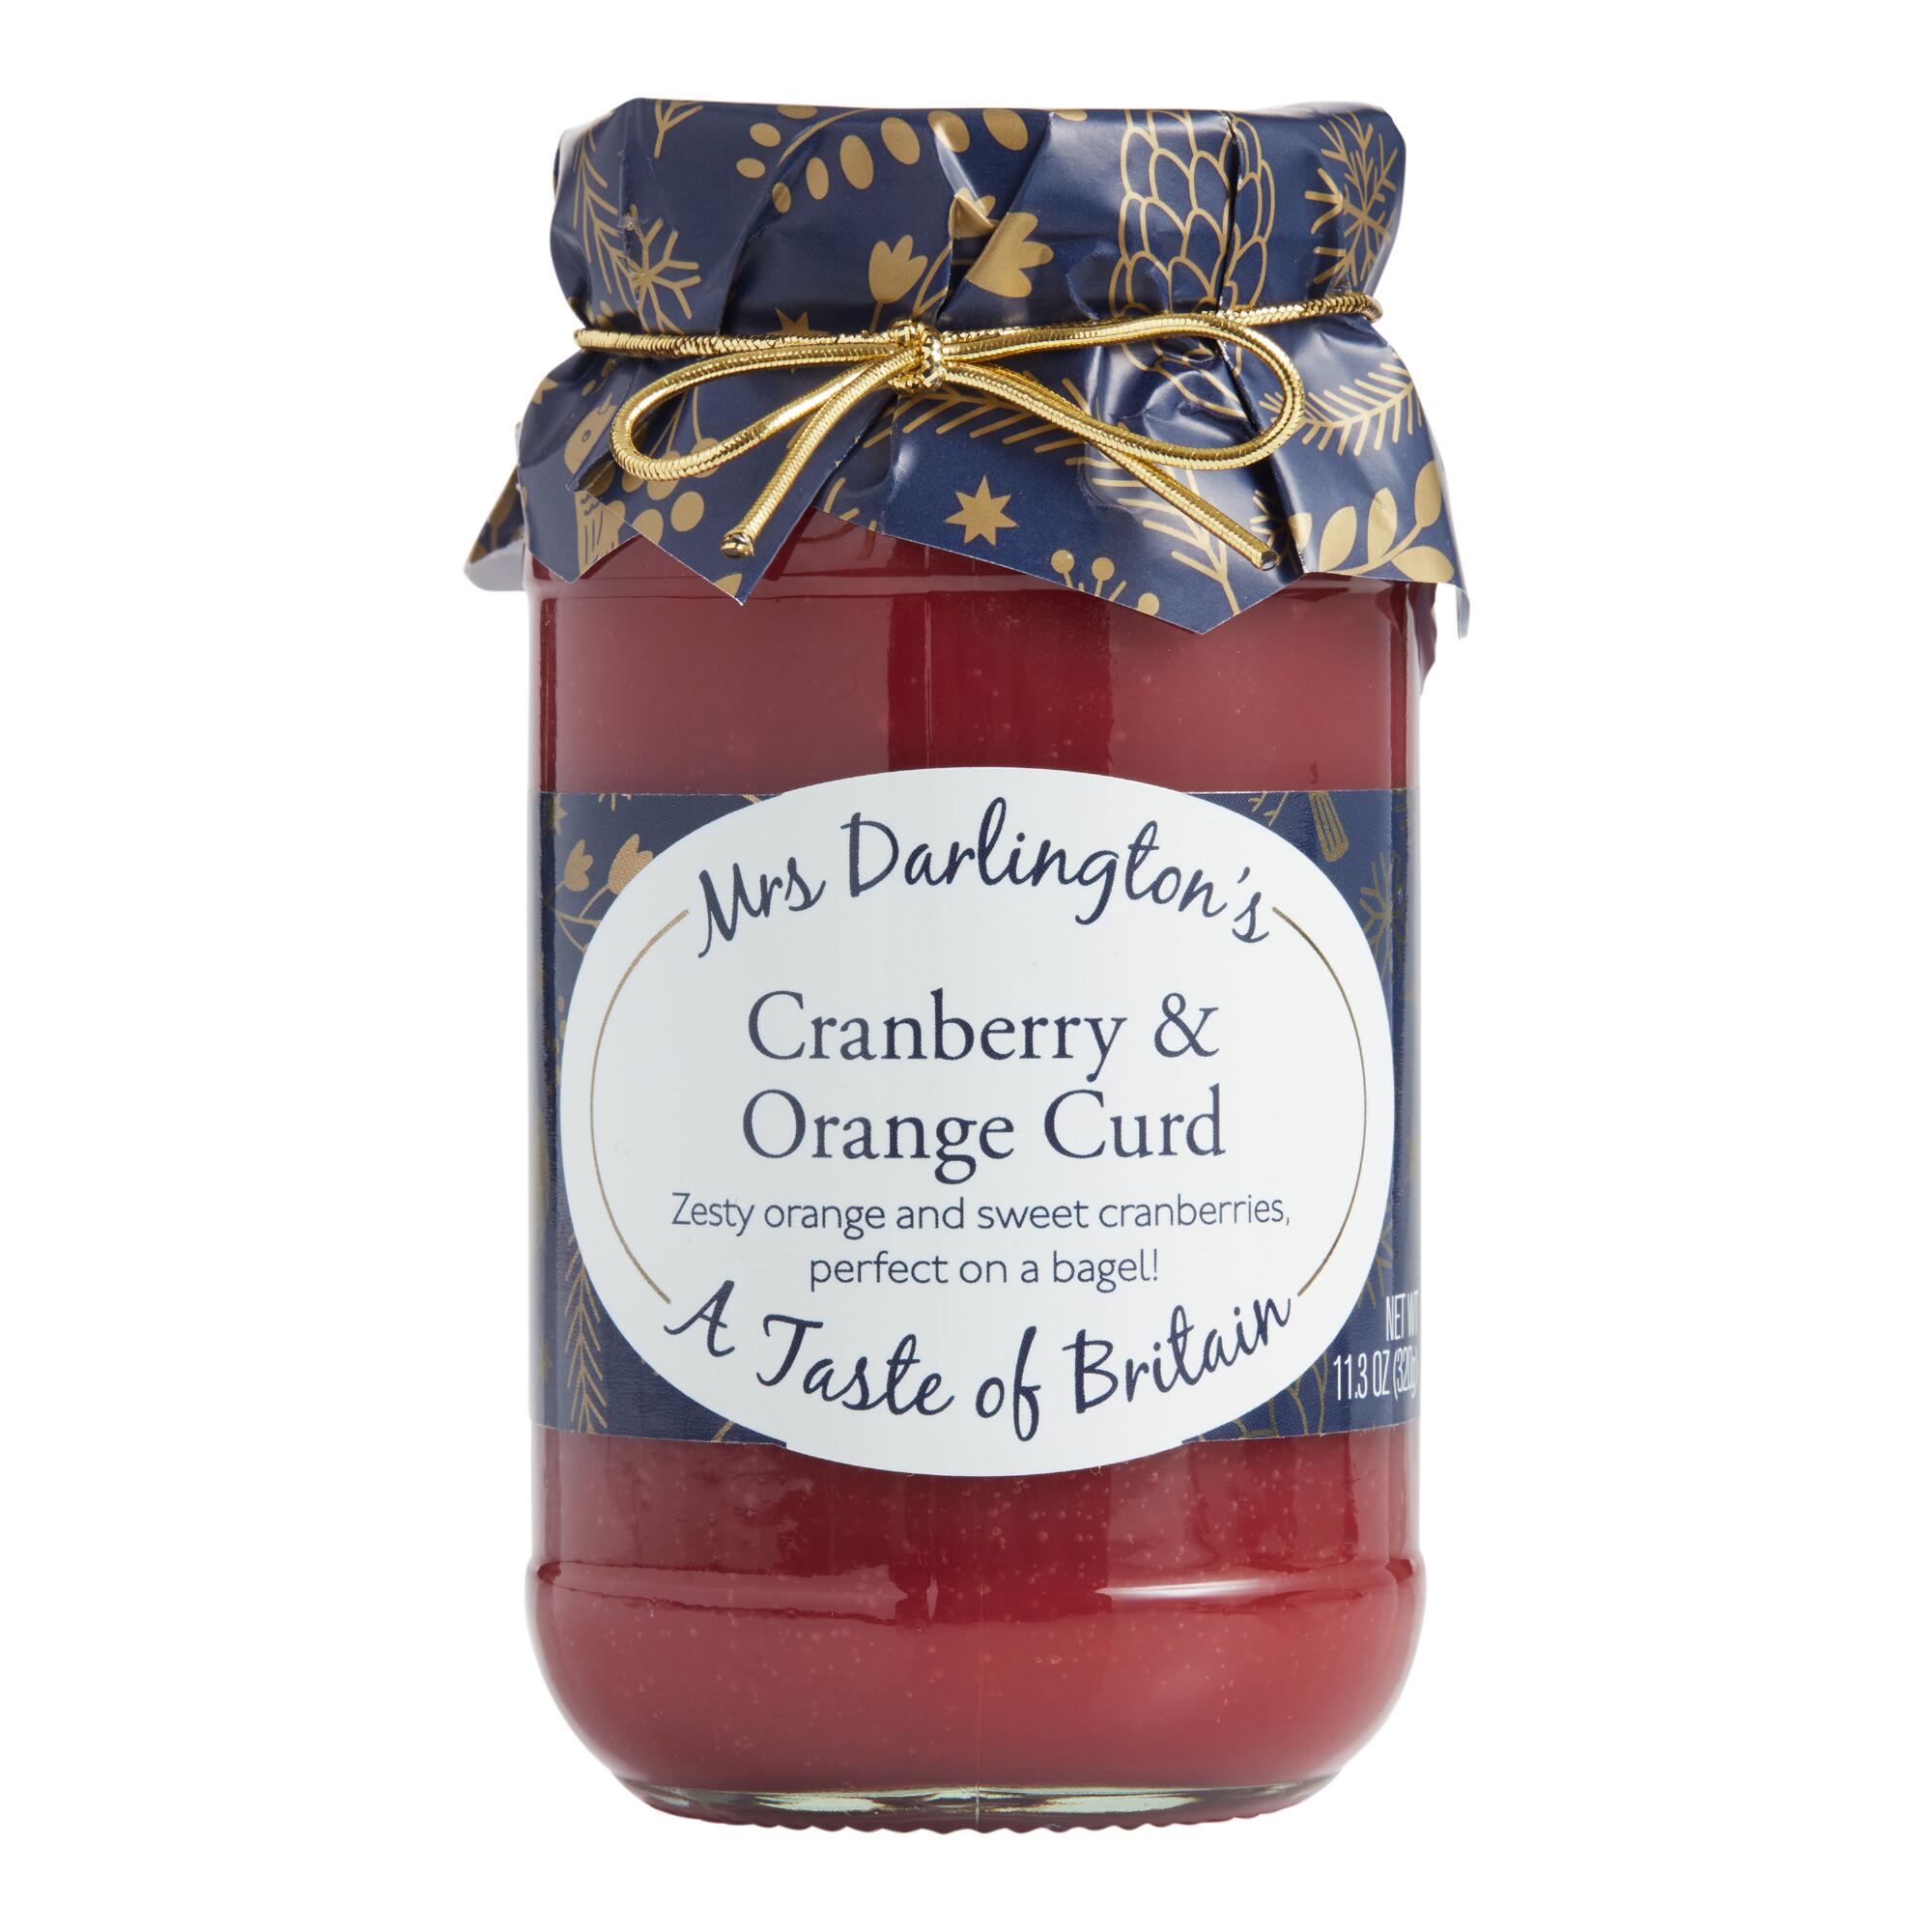 Mrs Darlington's Cranberry and Orange Curd by World Market